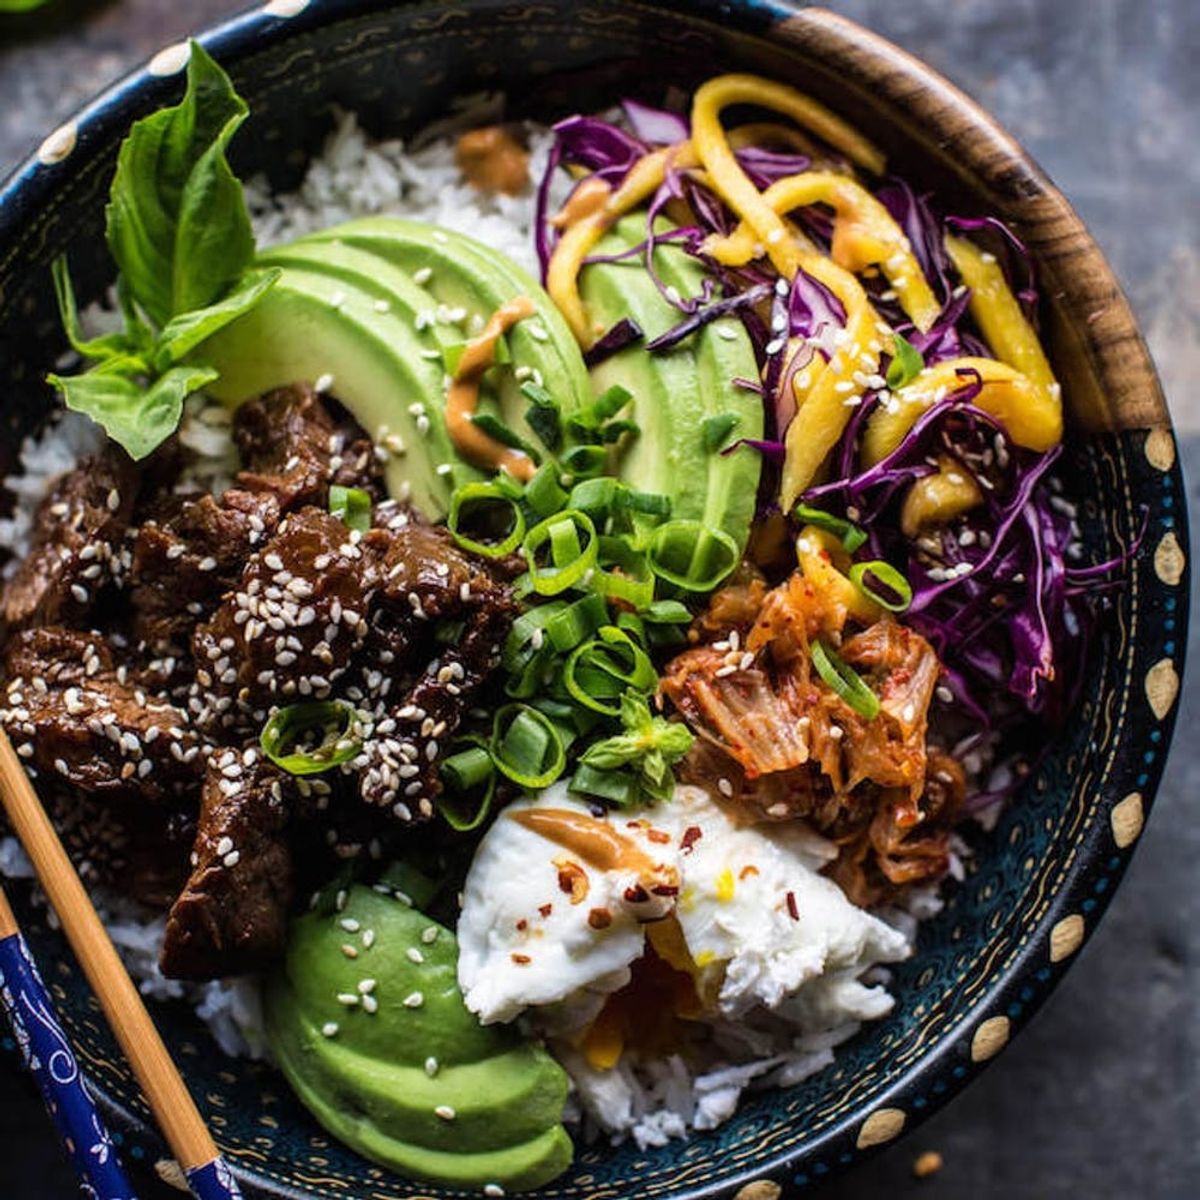 12 Bulgogi Recipes for When You Can’t Be Bothered to Leave the House